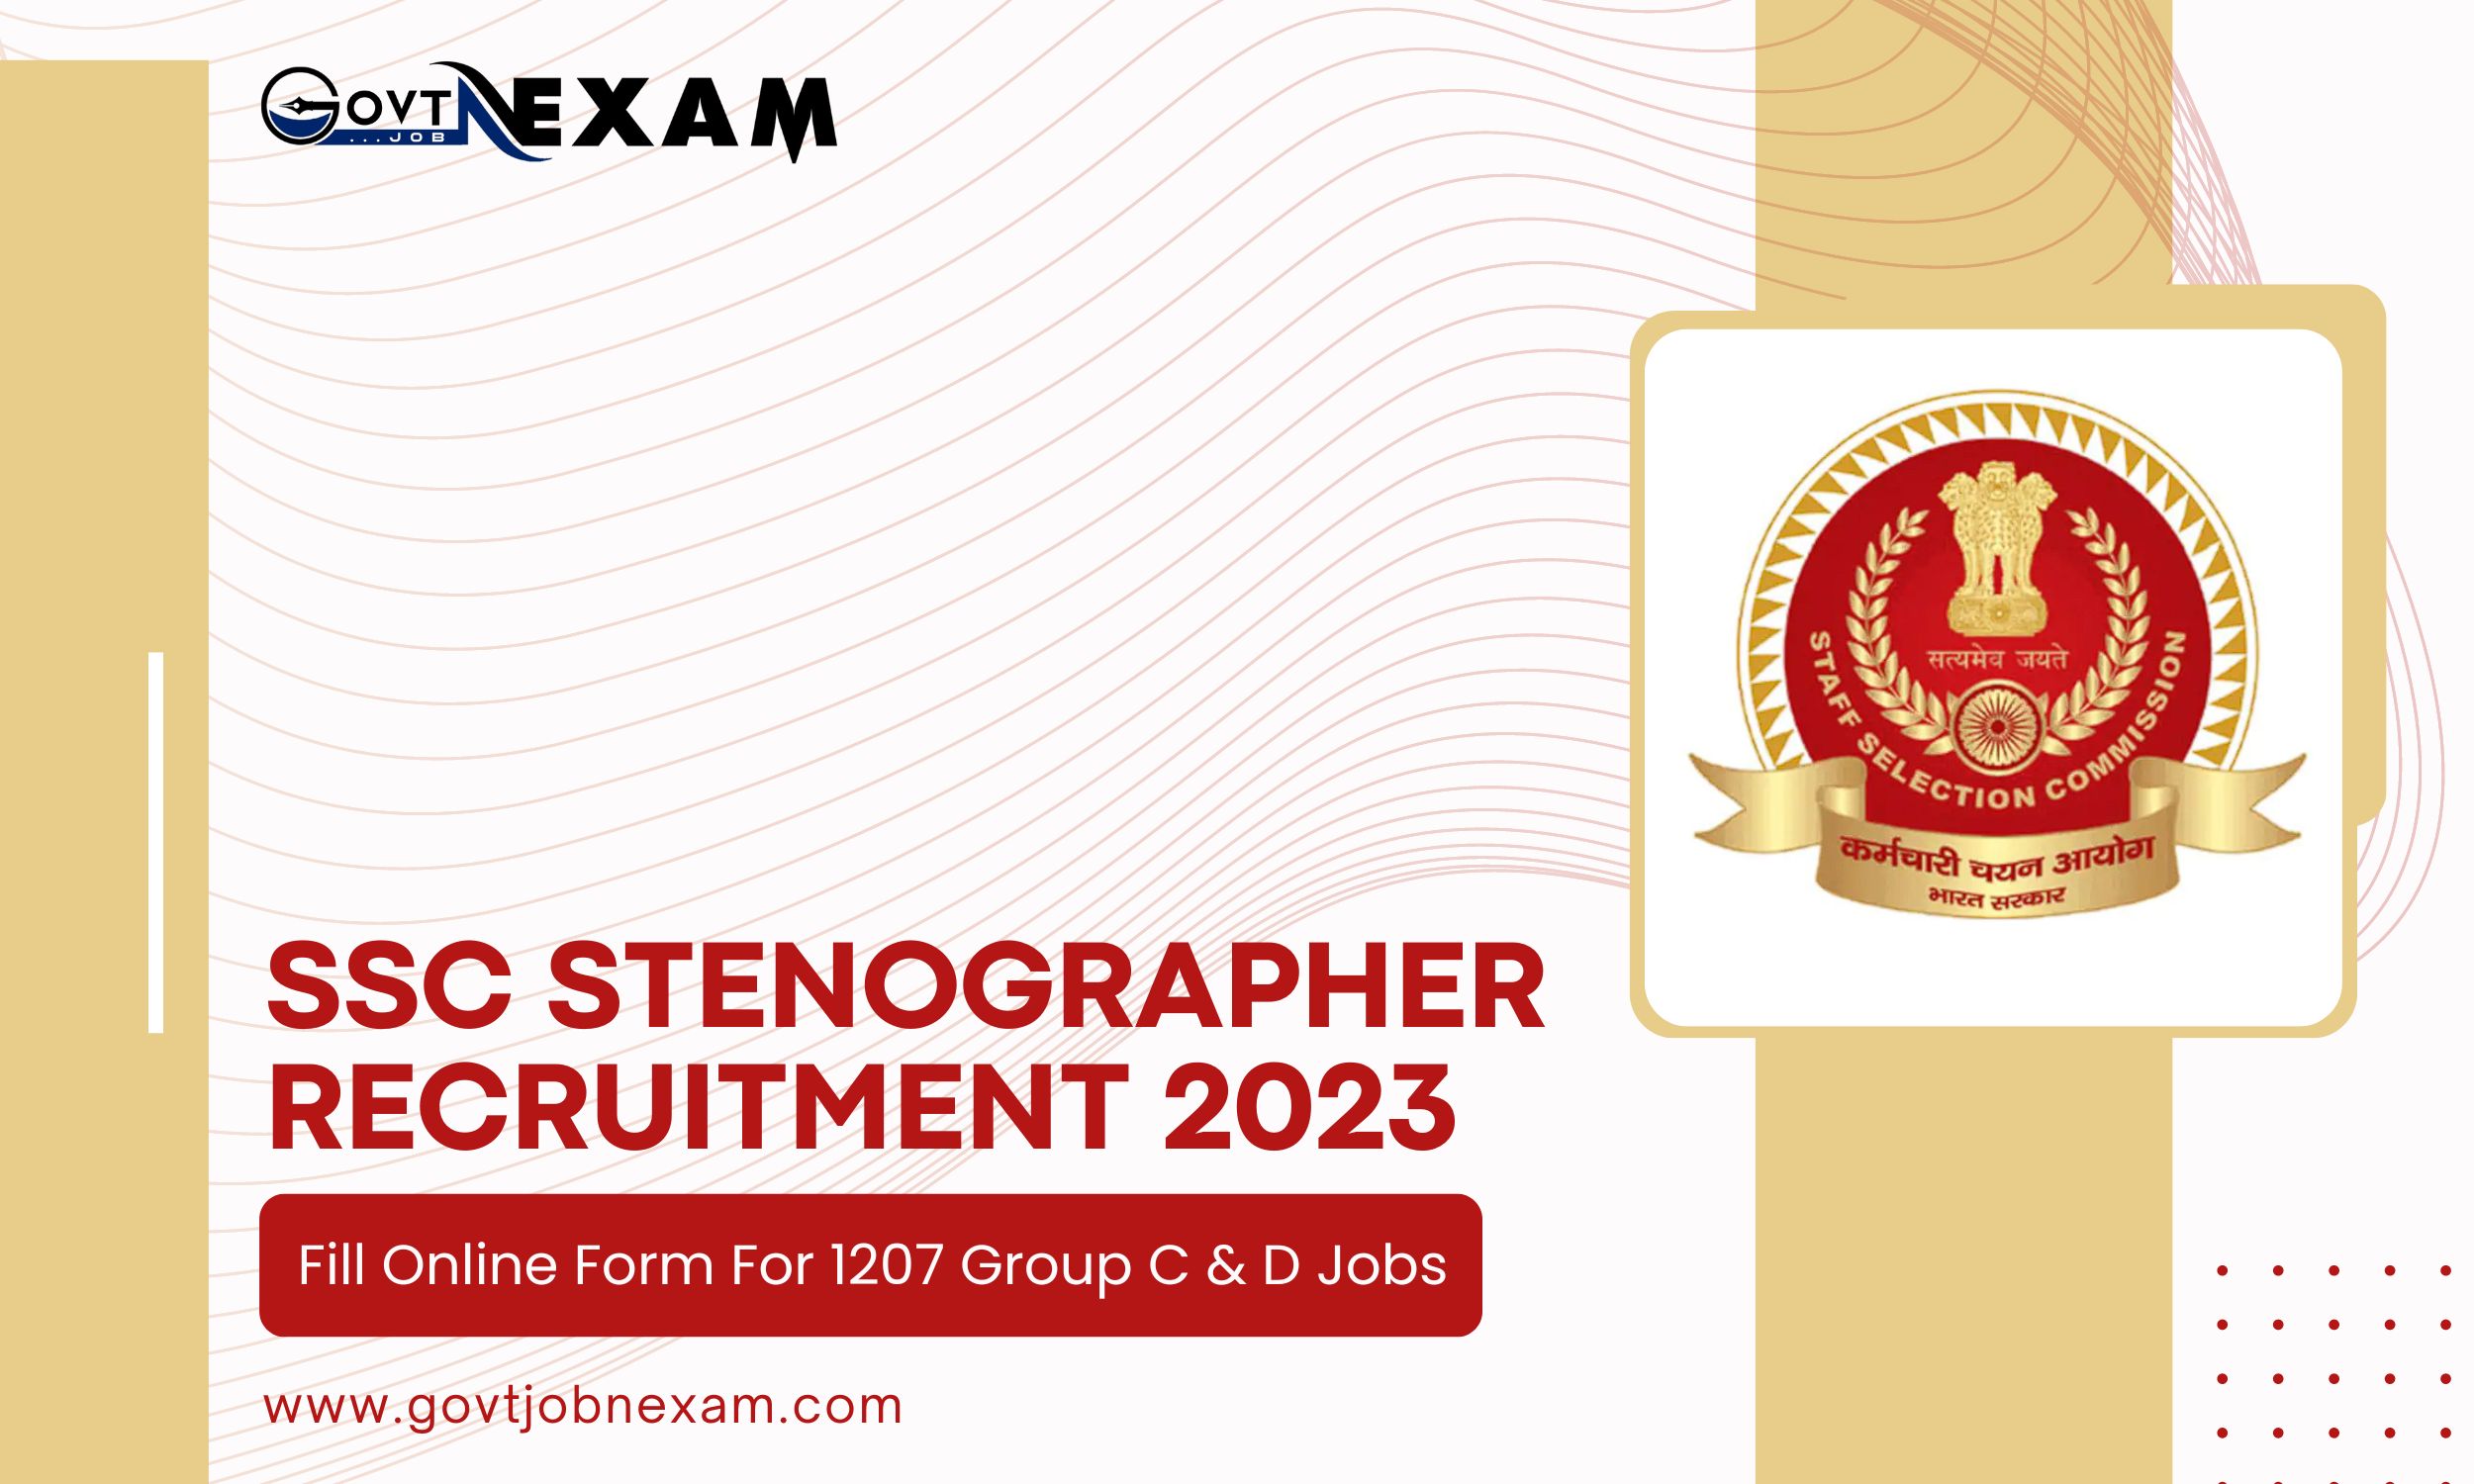 You are currently viewing SSC Stenographer Recruitment 2023: Fill Online Form For 1207 Group C & D Jobs